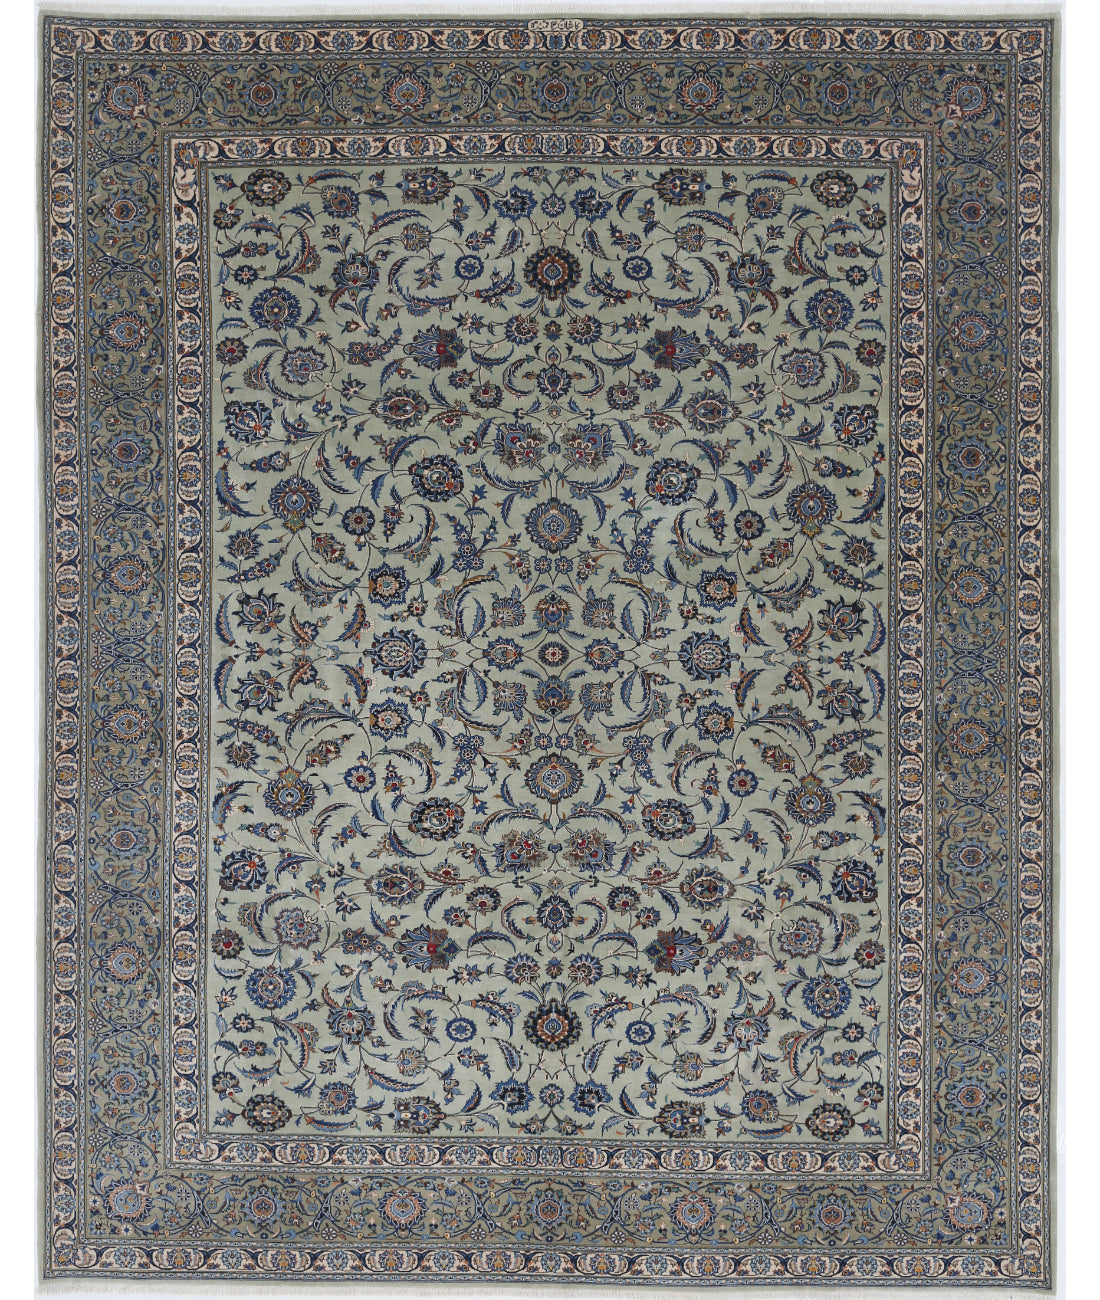 Hand Knotted Persian Kashan Wool Rug - 9'11'' x 11'6'' 9'11'' x 11'6'' (298 X 345) / Green / Blue